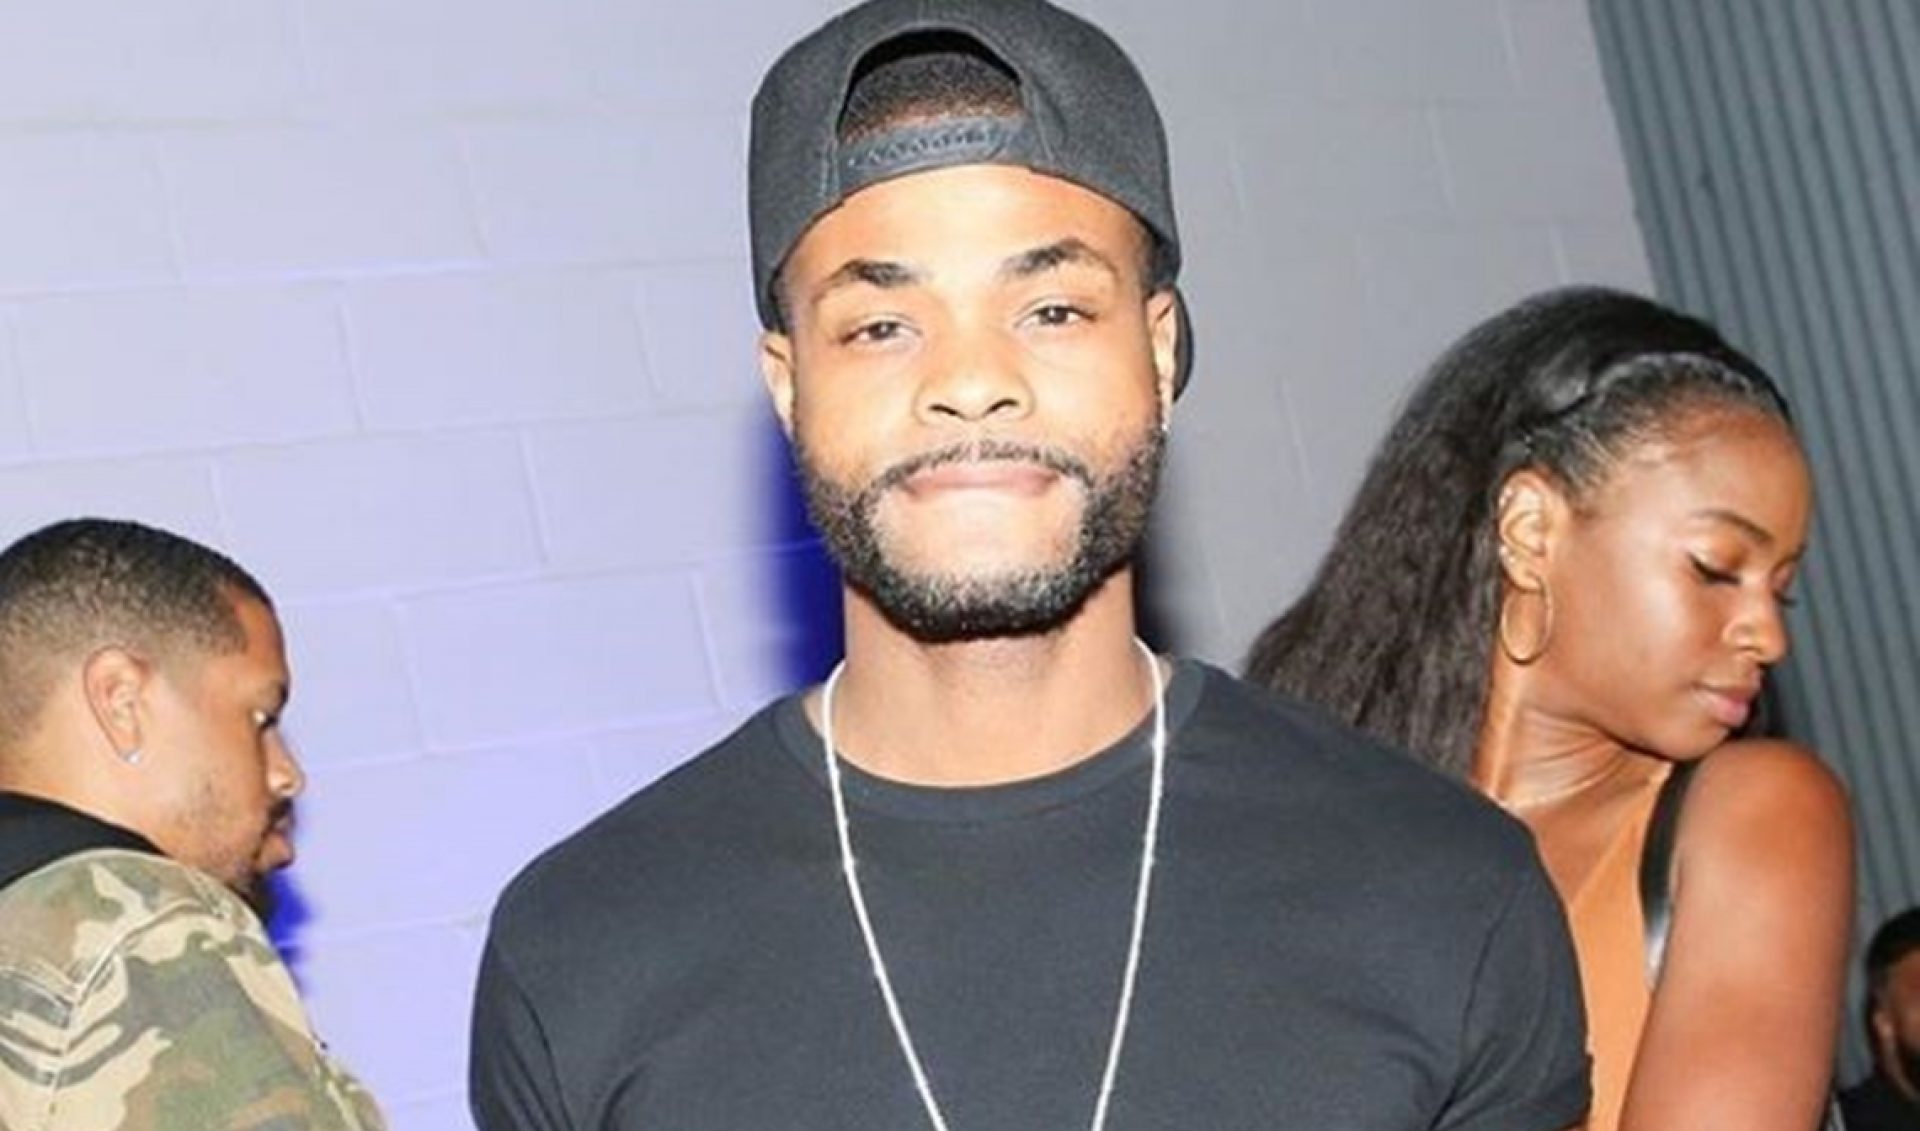 Awesomeness’ Next Film, With King Bach And Jerry O’Connell, Is Tentatively Titled ‘The F-ck It List’